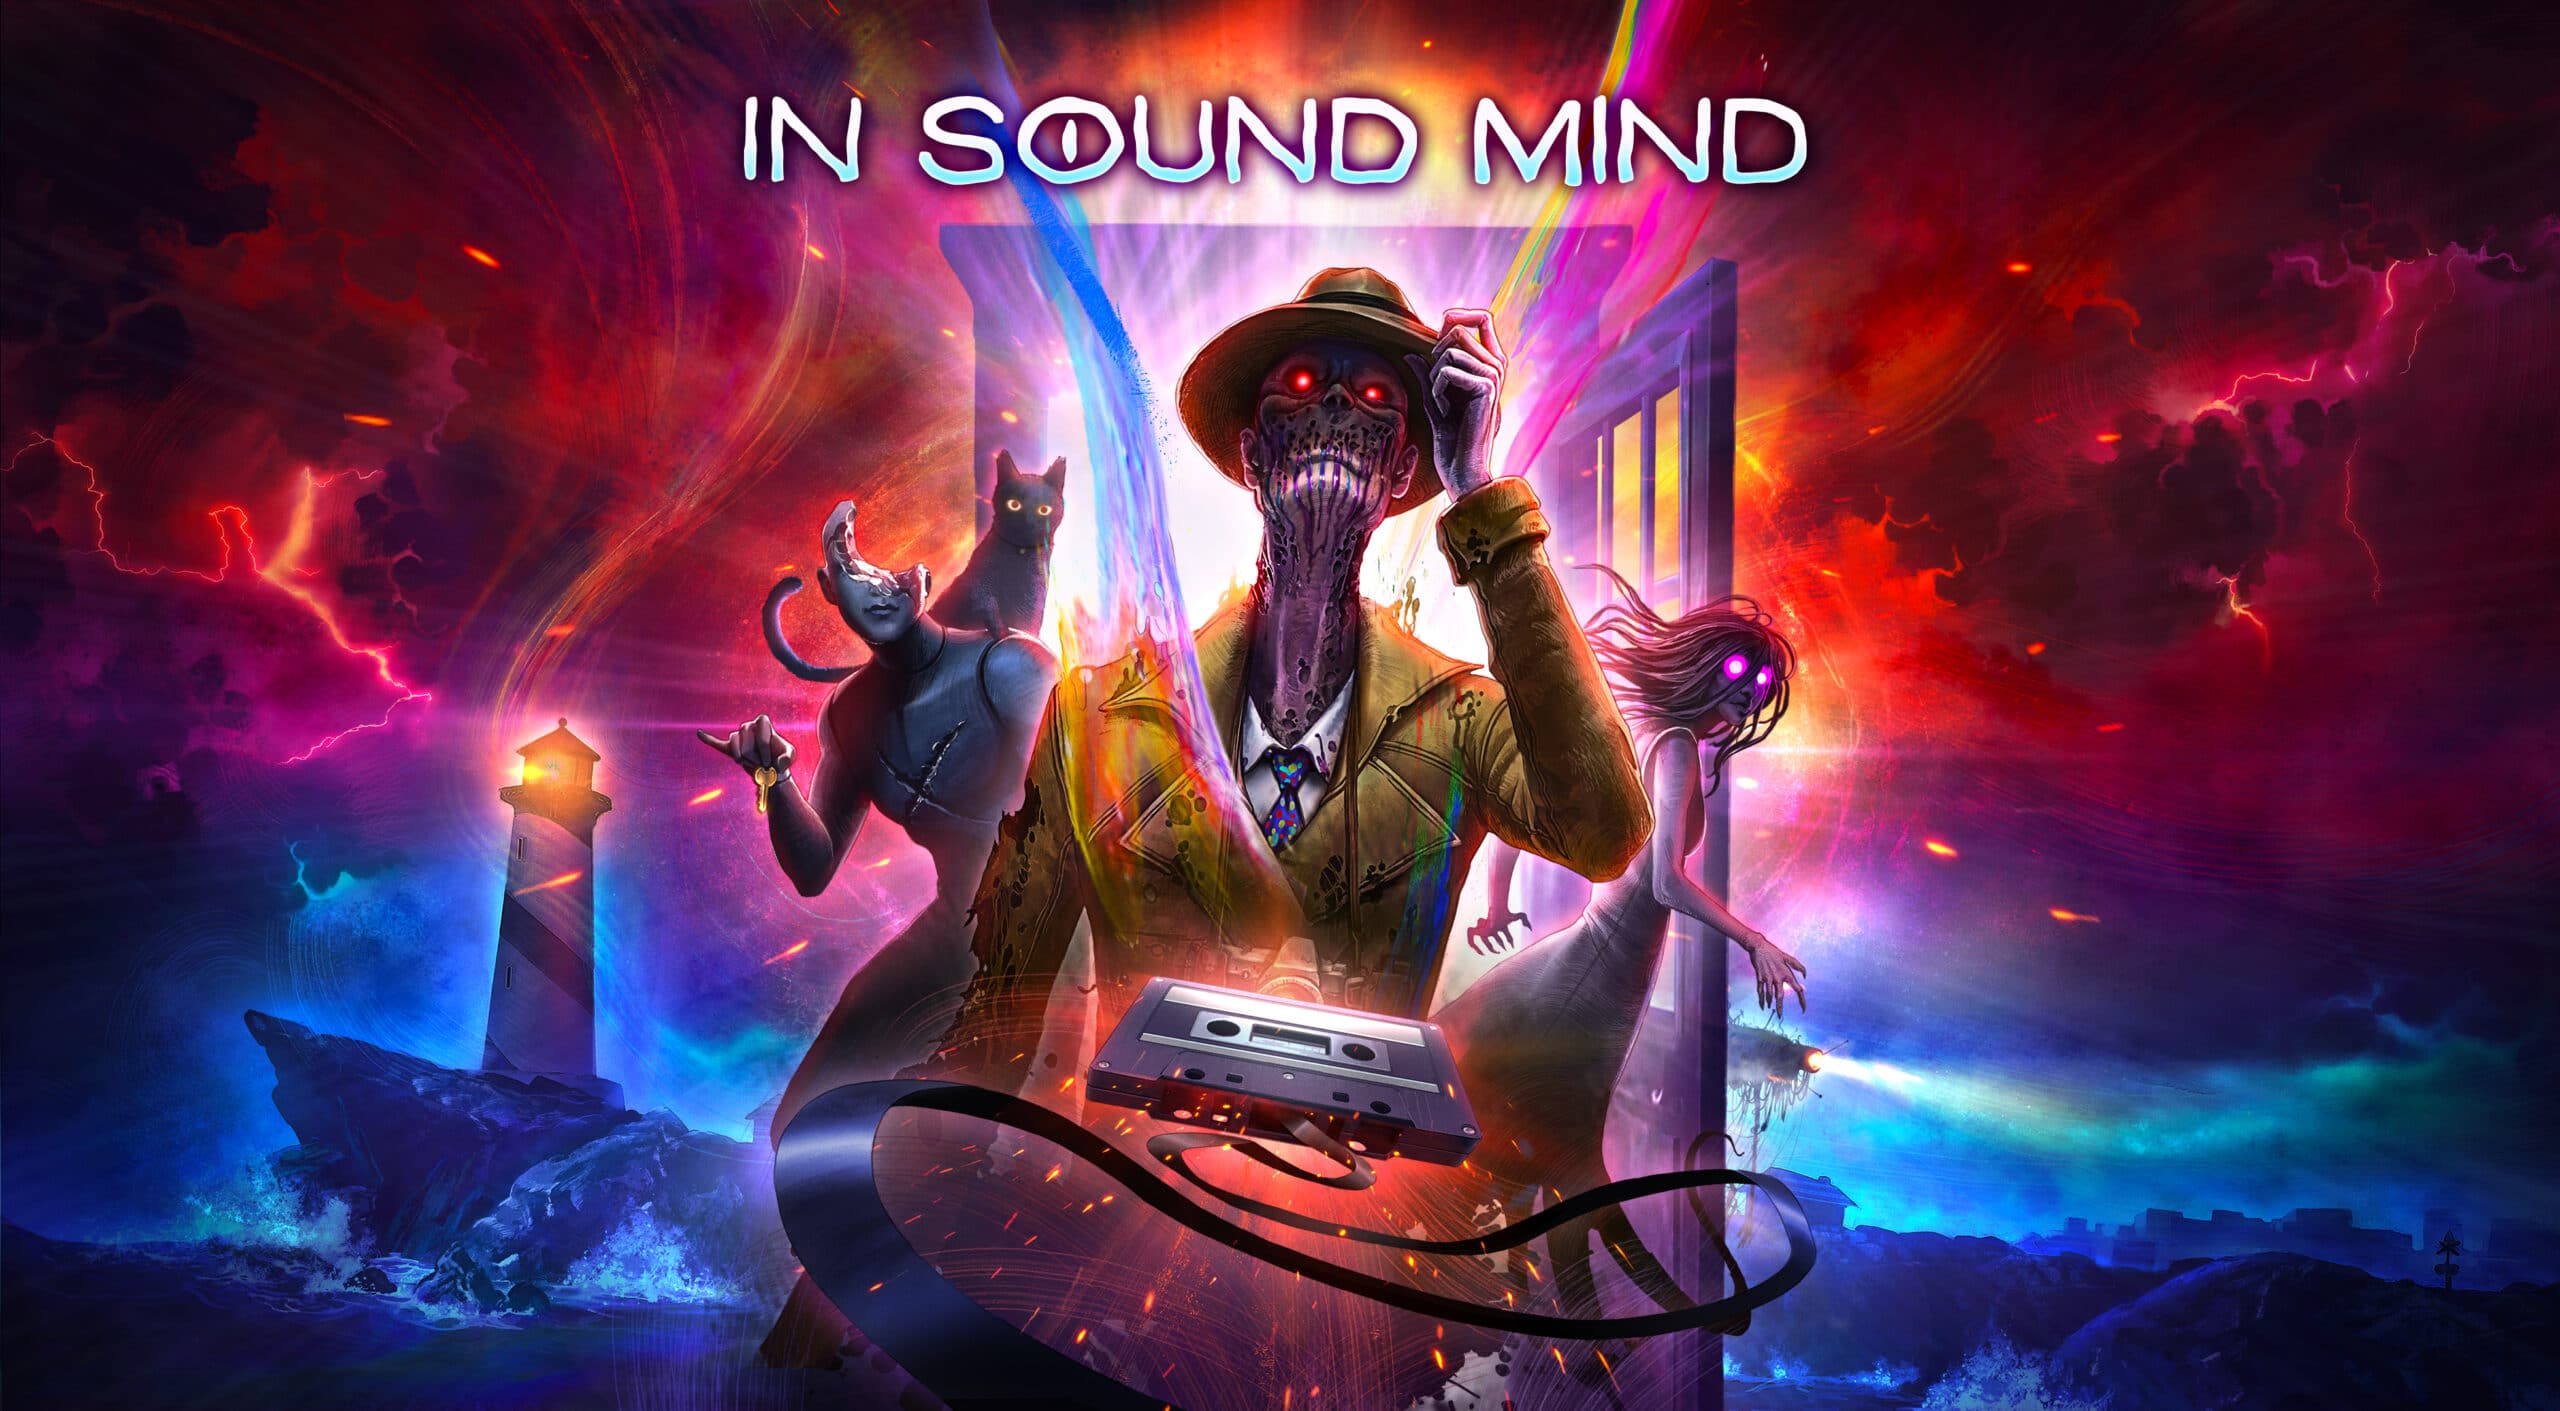 Let's find out the new trailer for In Sound Mind thumbnail